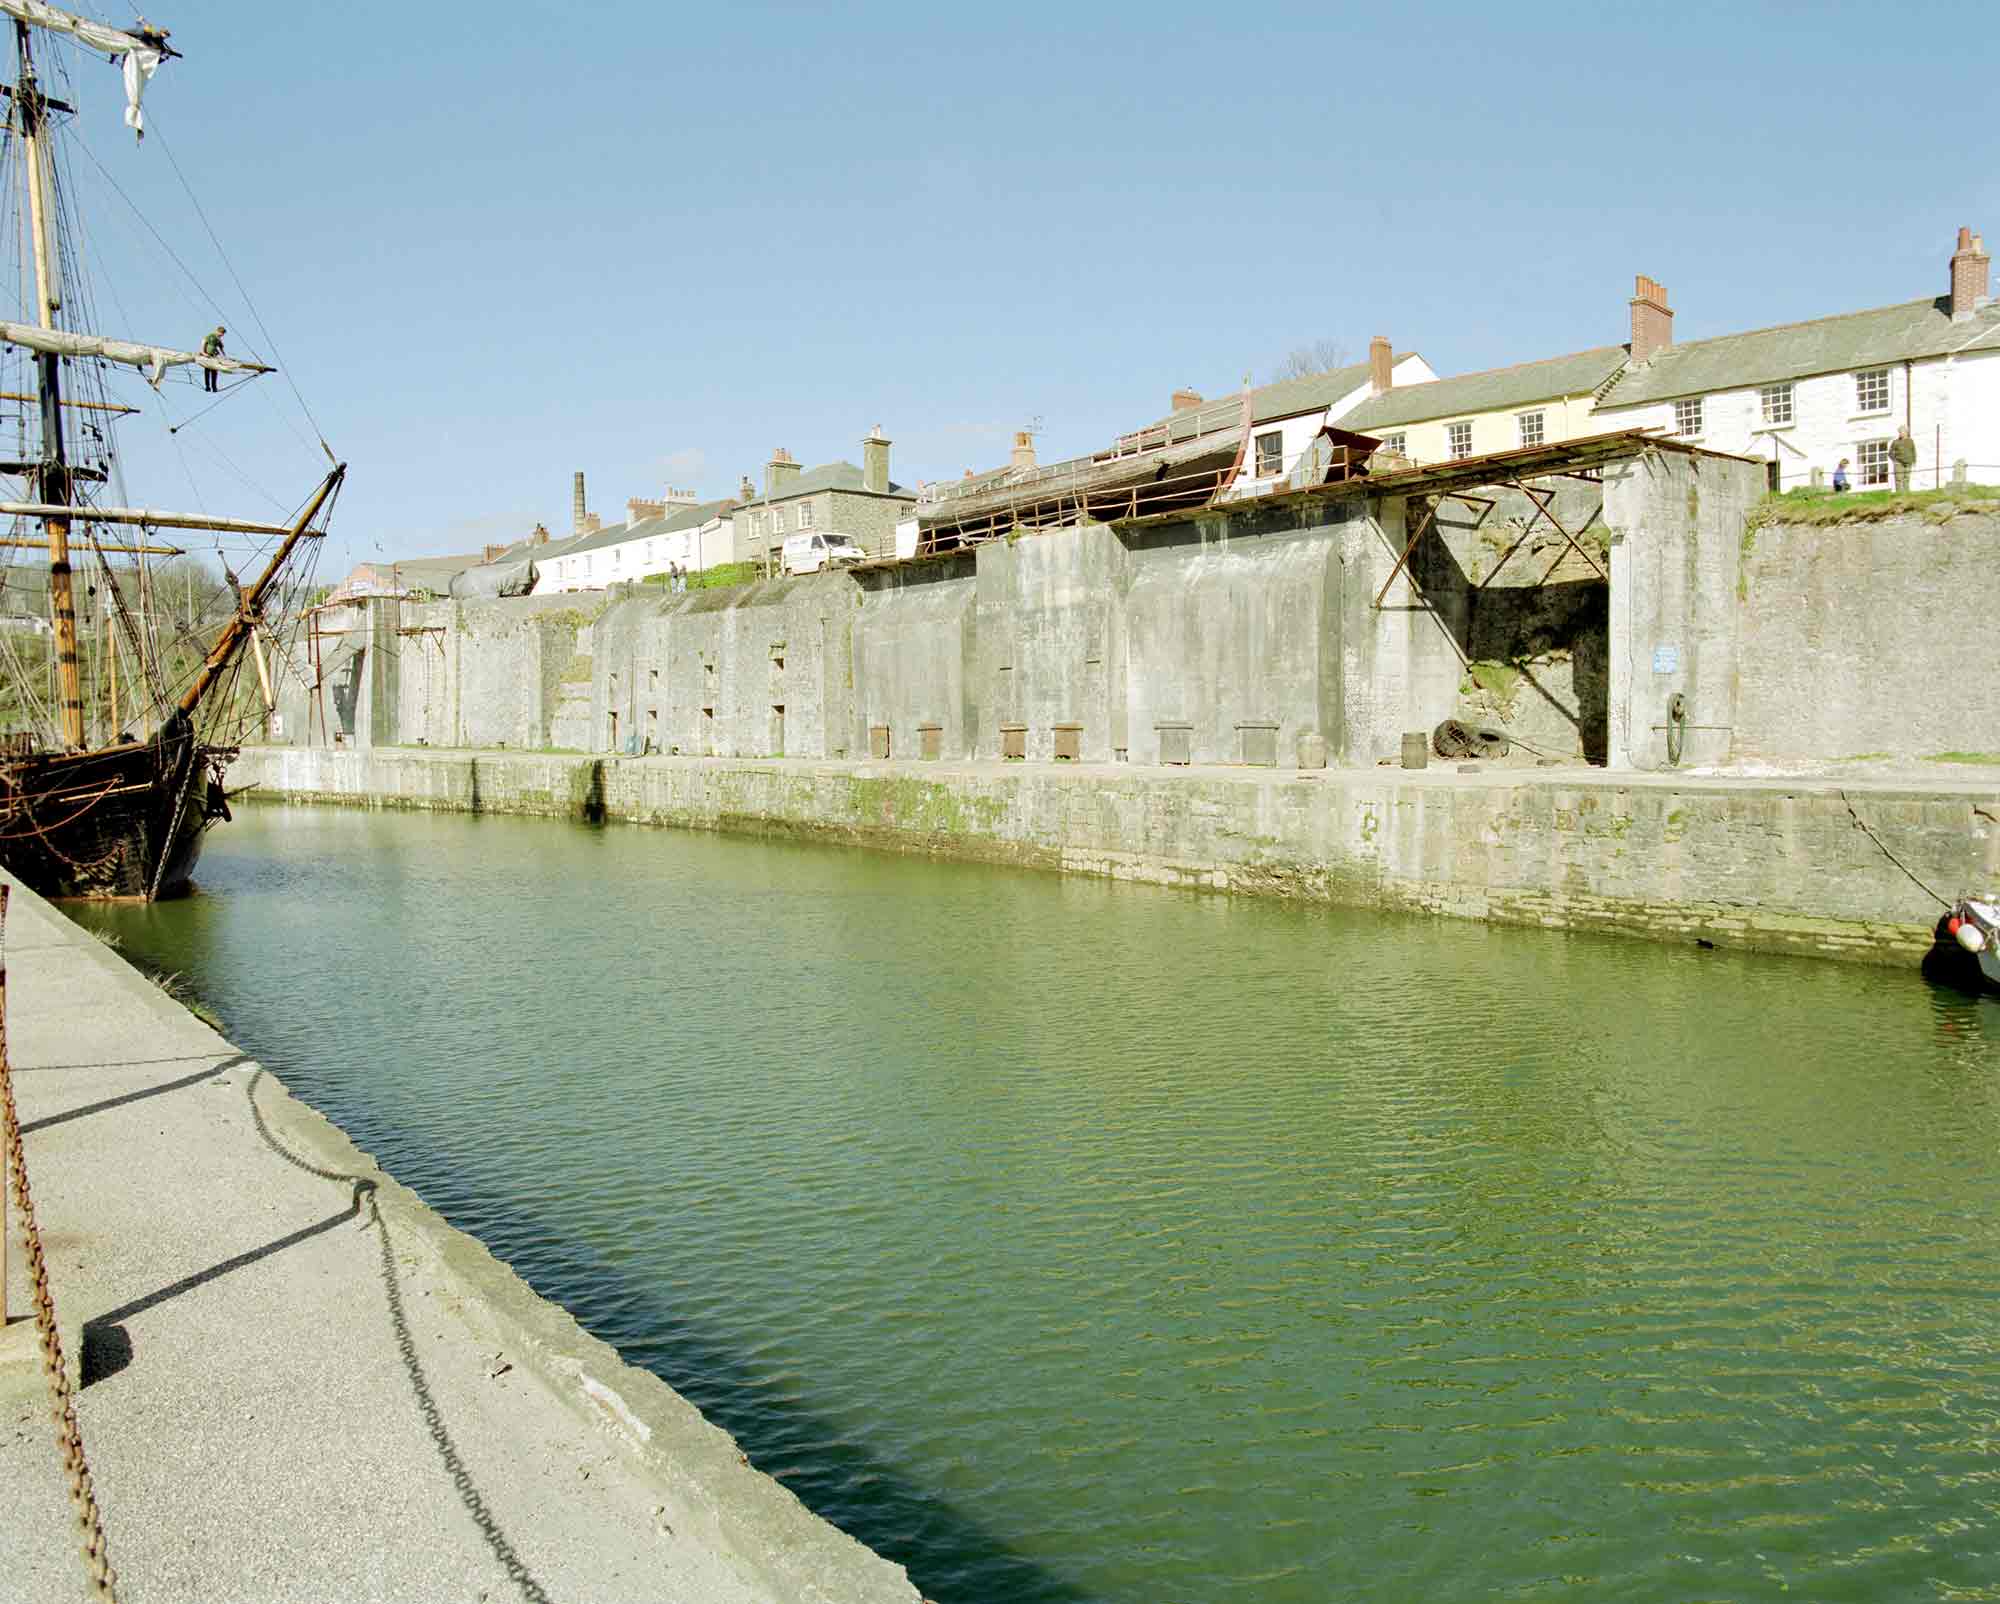 Sailing ship in harbour and houses can be seen beyond the high harbour walls